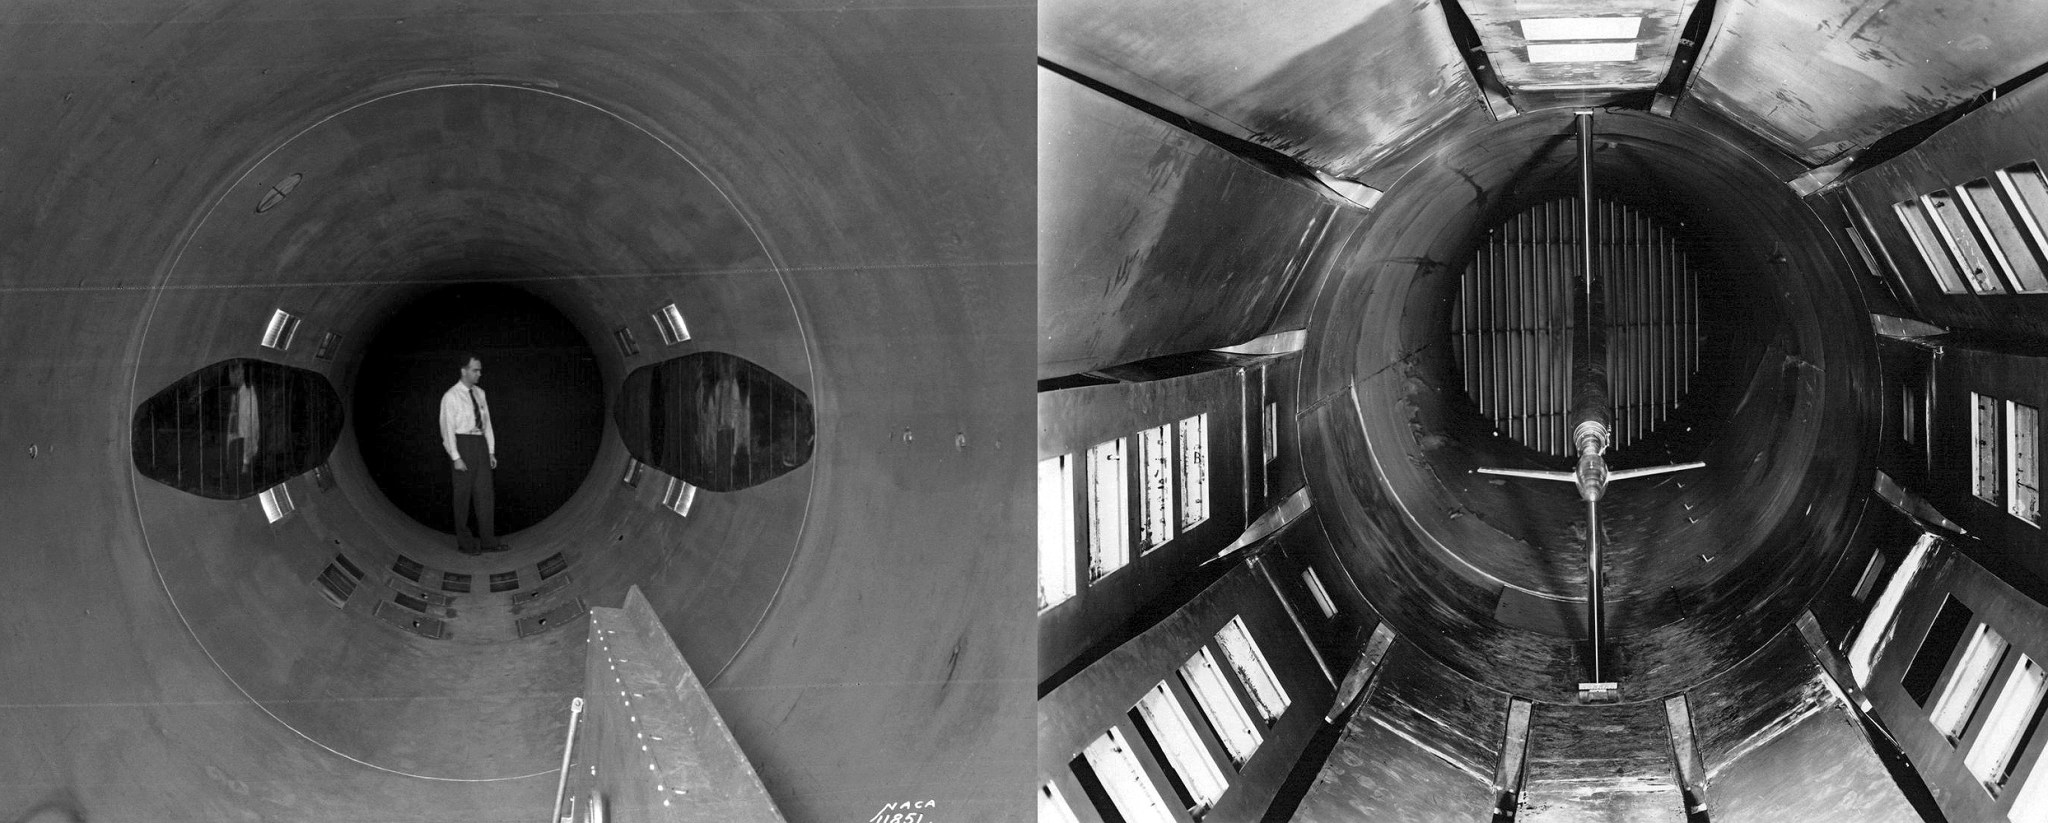 Langley 8-Foot High Speed Tunnel in 1936 with slotted-throat design